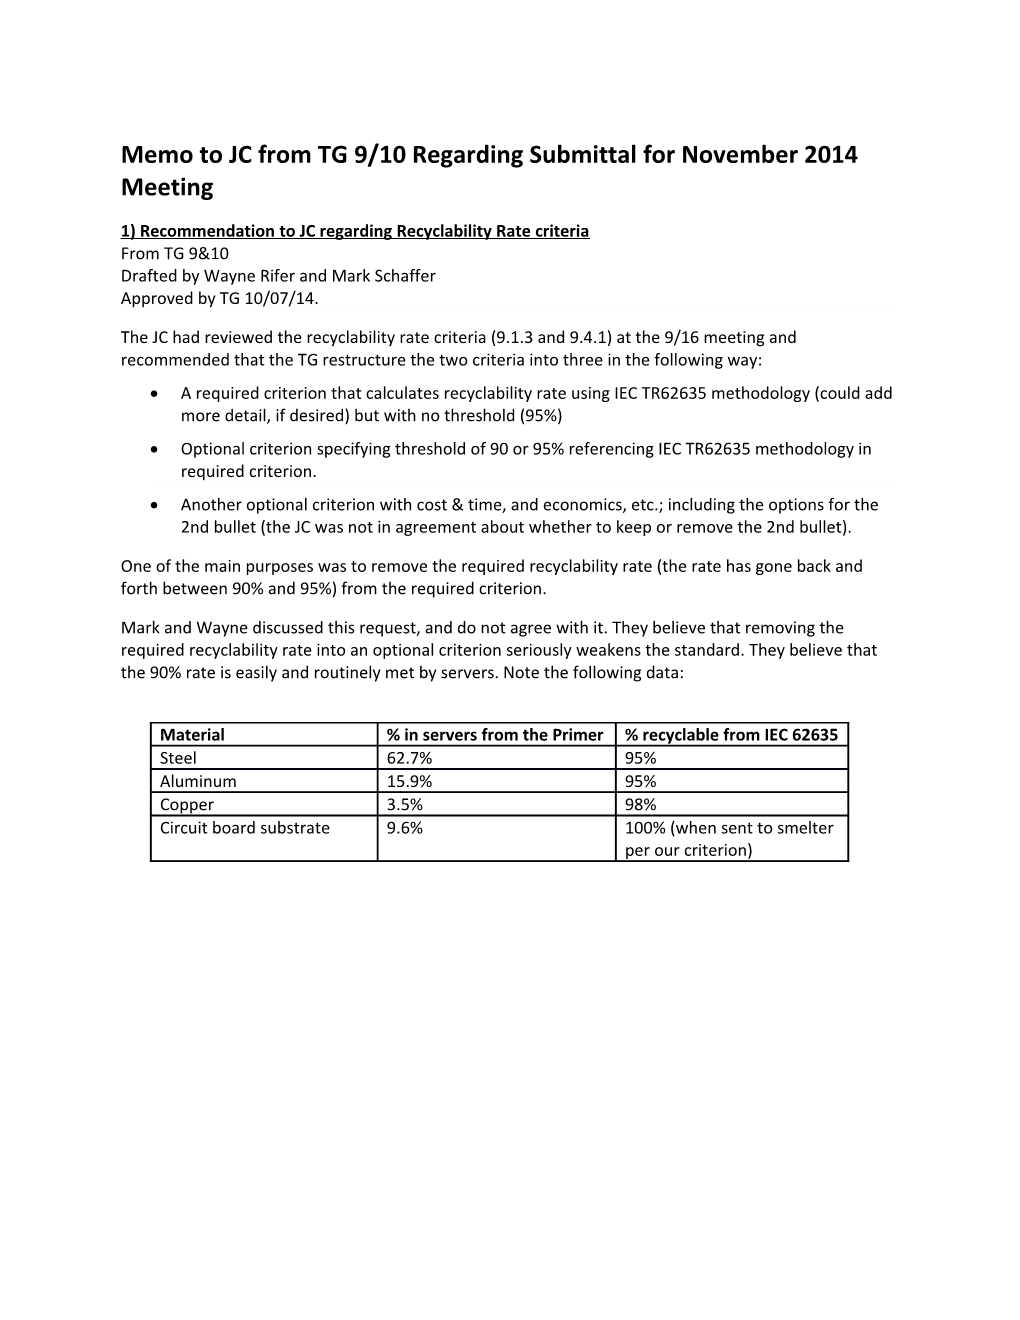 Memo to JC from TG 9/10 Regarding Submittal for November 2014 Meeting